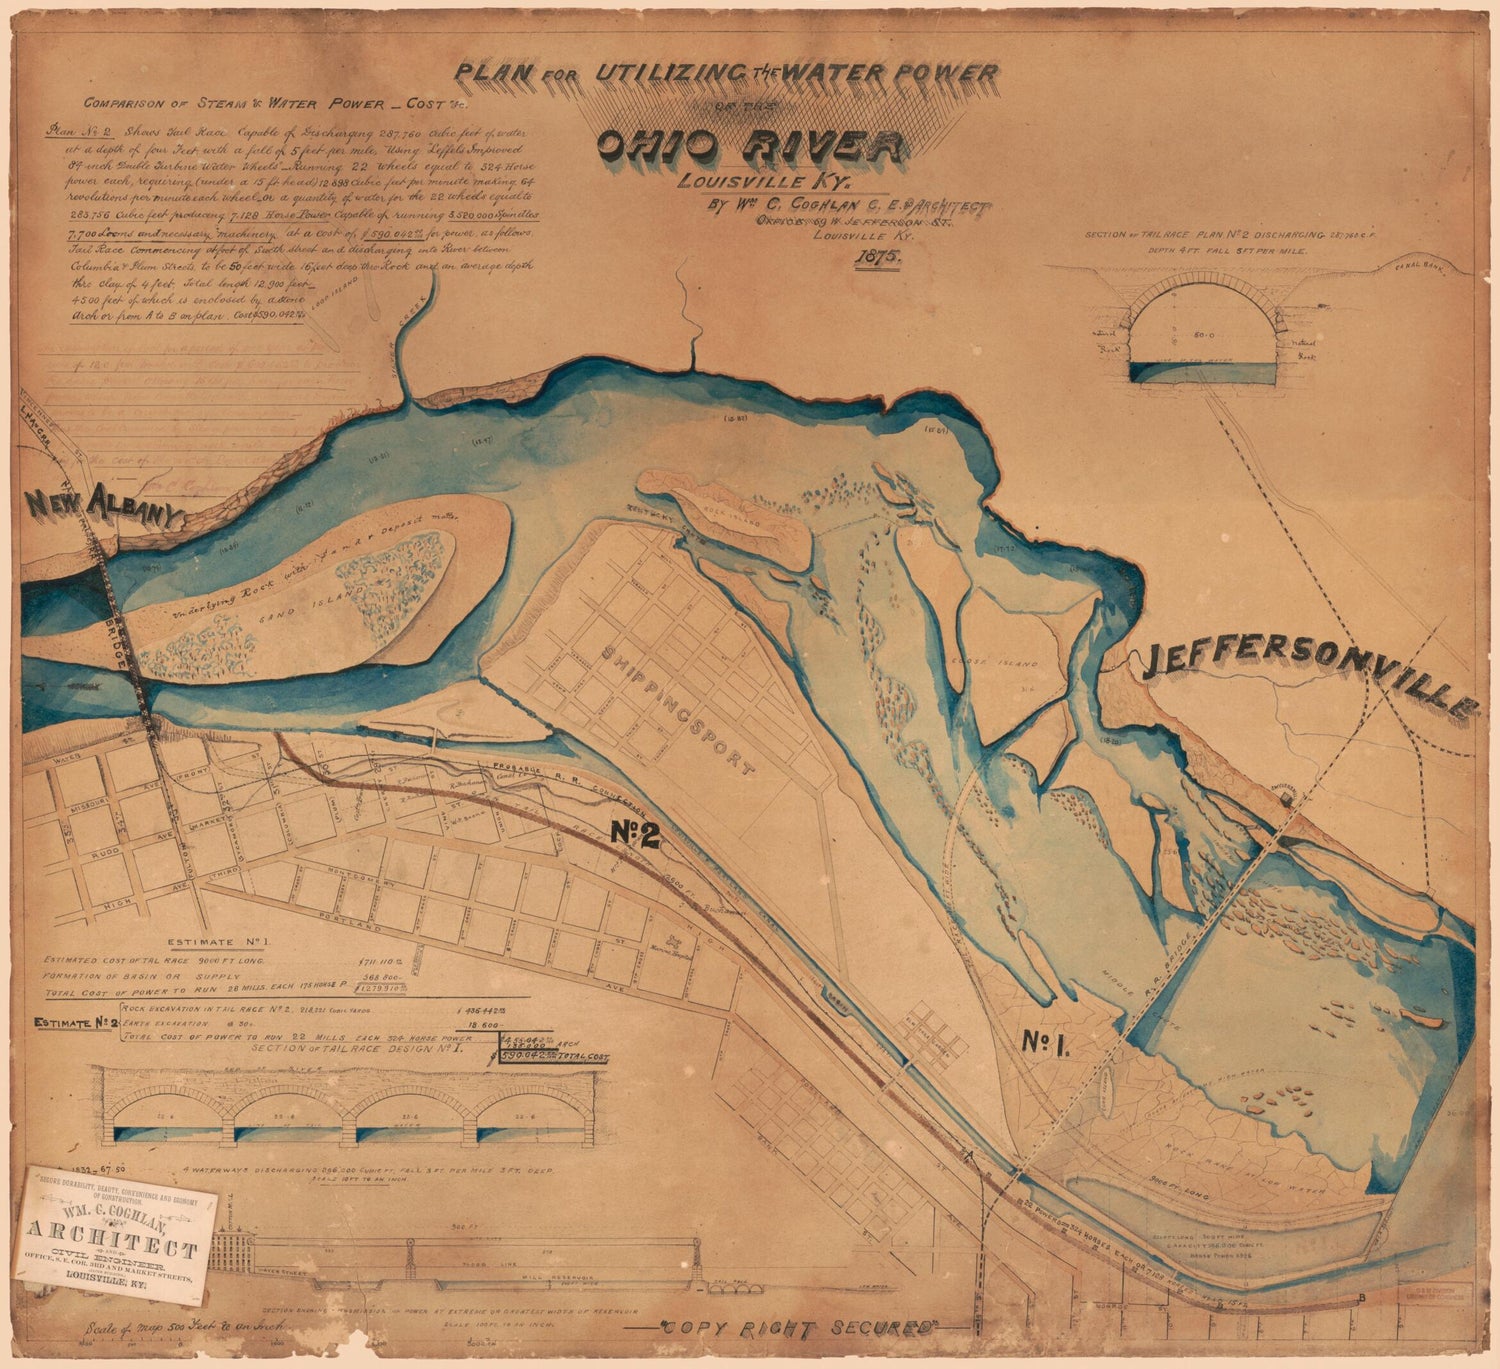 This old map of Plan for Utilizing the Water Power of the Ohio River at Louisville, Ky from 1875 was created by Wm. C. (William C.) Coghlan in 1875